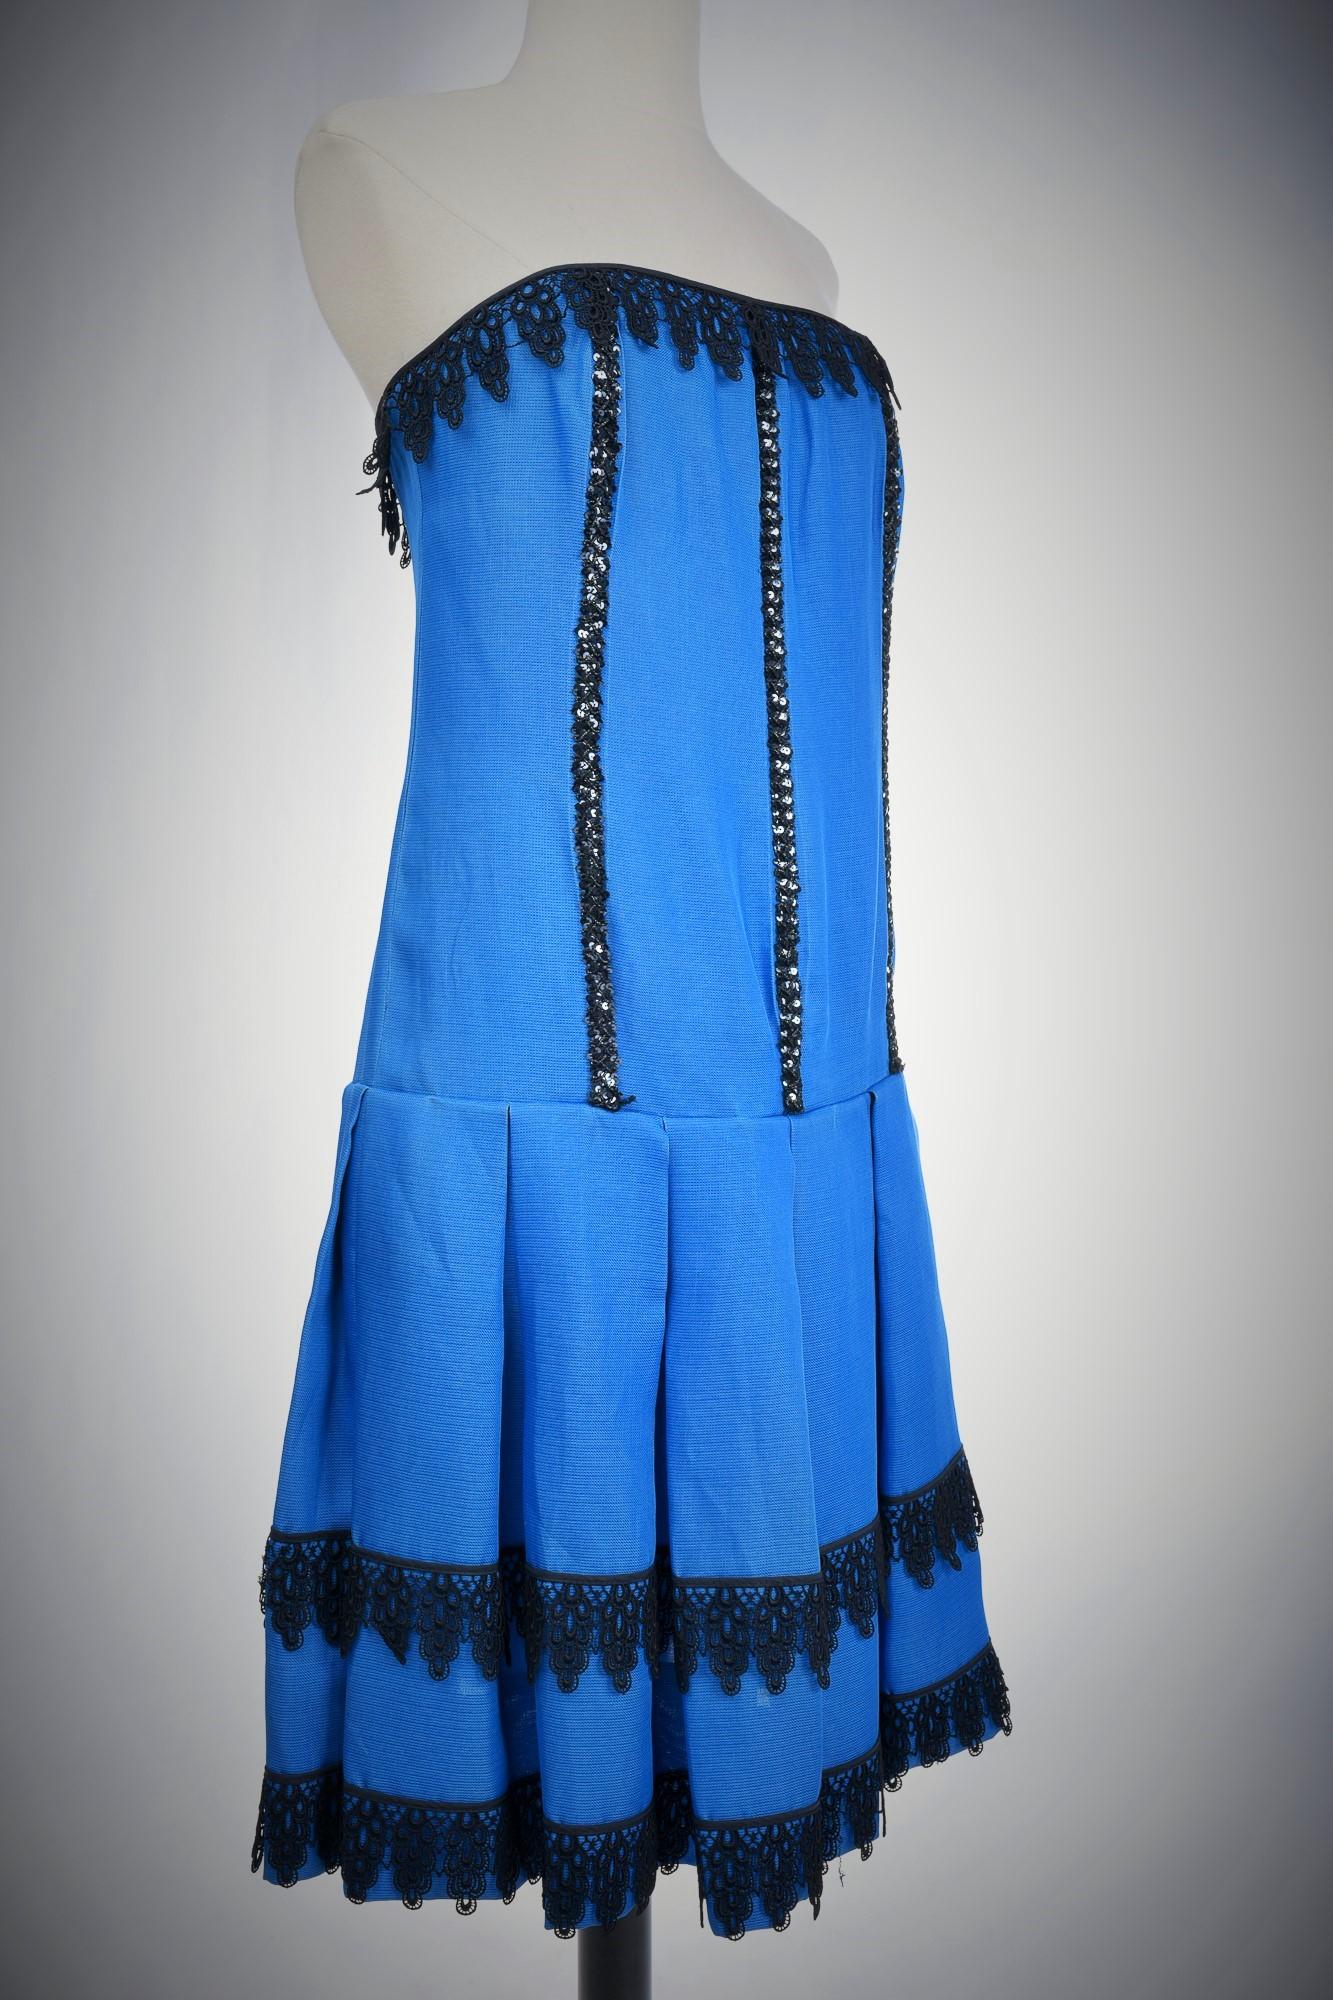 Hubert de Givenchy Cocktail Dress in Gazar Silk and Lace Circa 1968/1970 For Sale 6